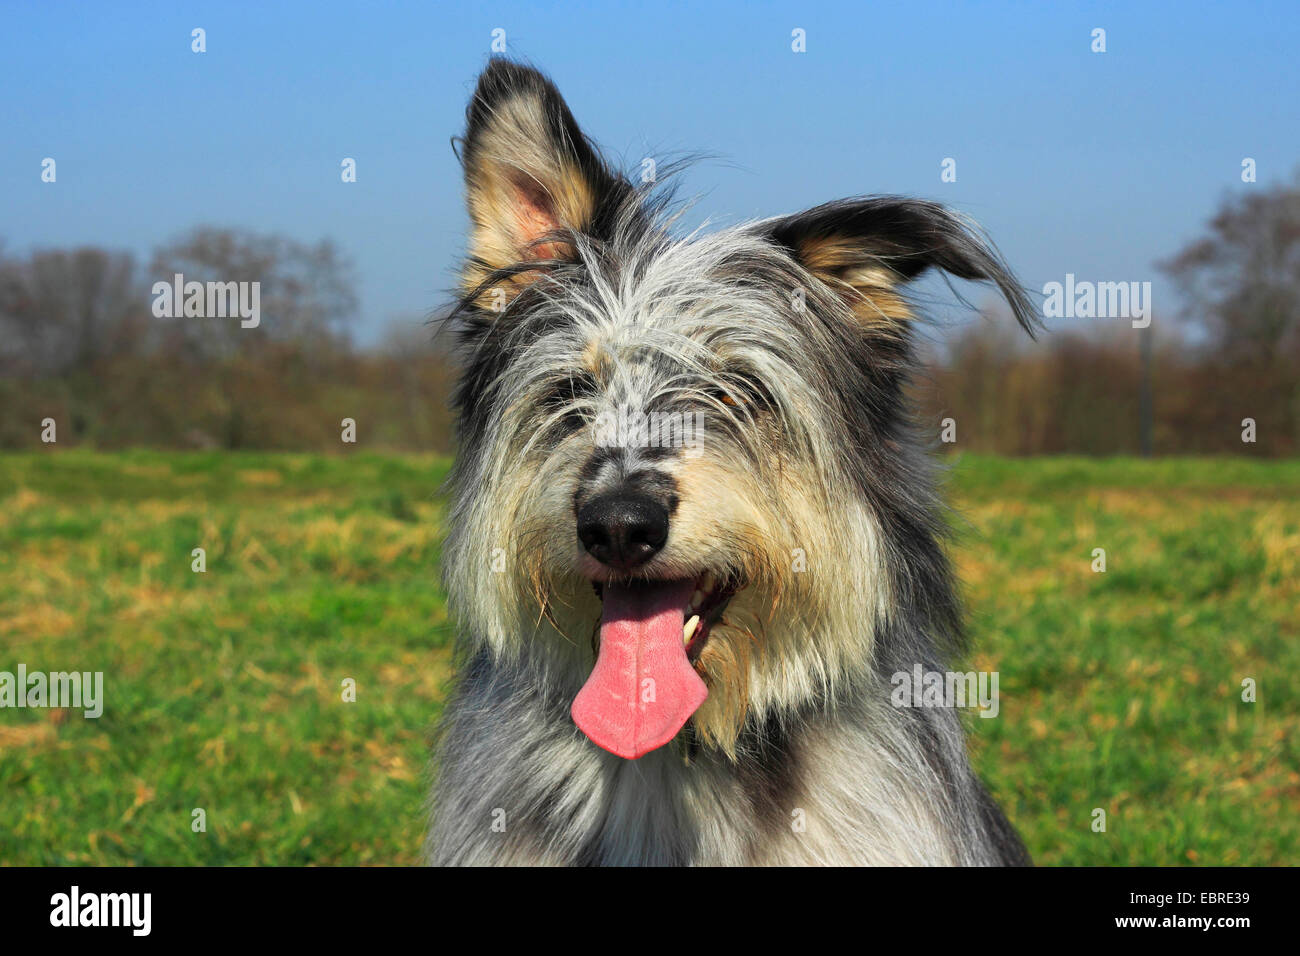 Berger de Picardie, Berger Picard (Canis lupus f. familiaris), three year old mixed breed, portrait, Germany Stock Photo